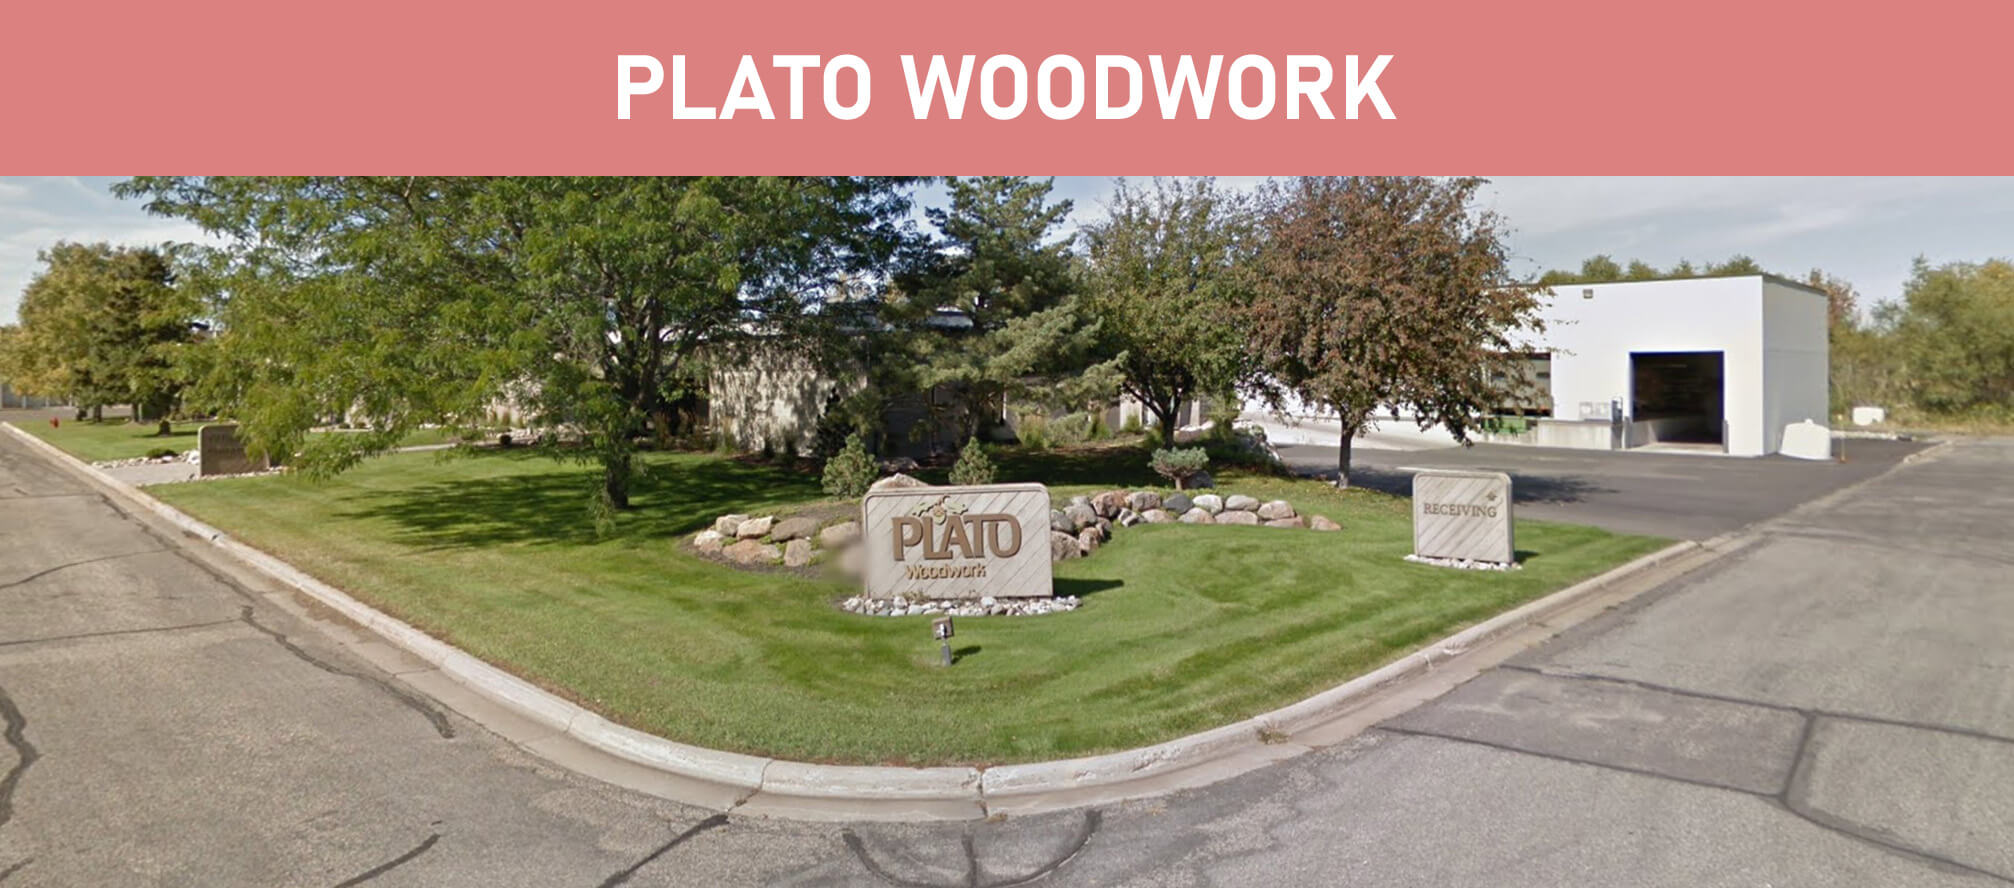 Plato Woodwork Crafting Timeless and Durable Cabinetry Solutions Featured image